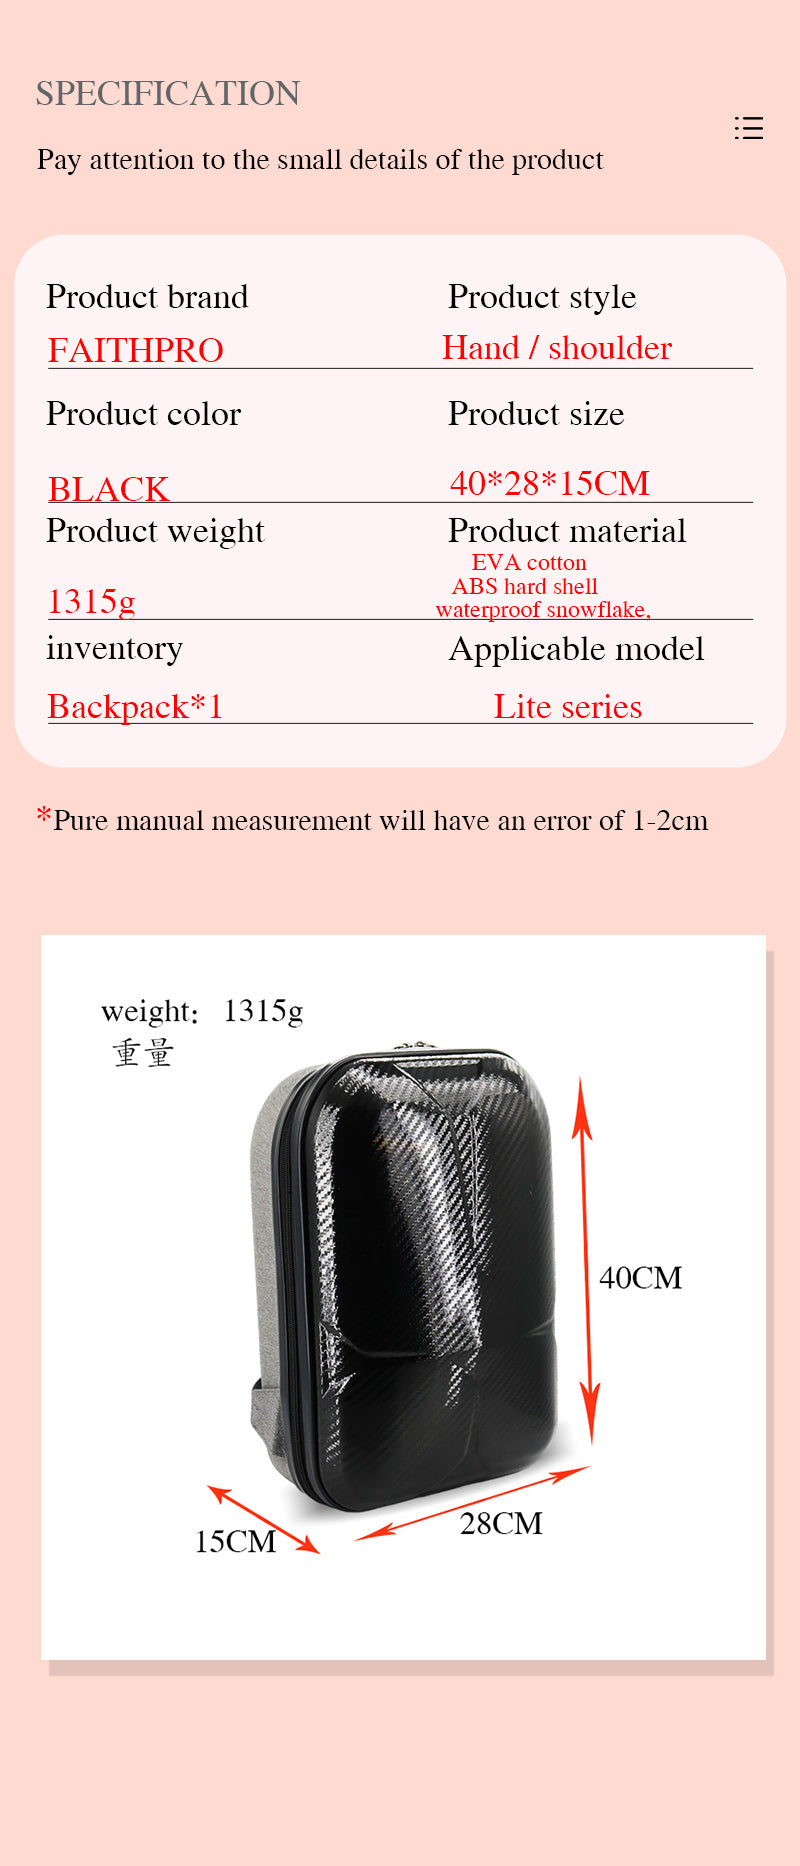 autel evo lite bag specification and size